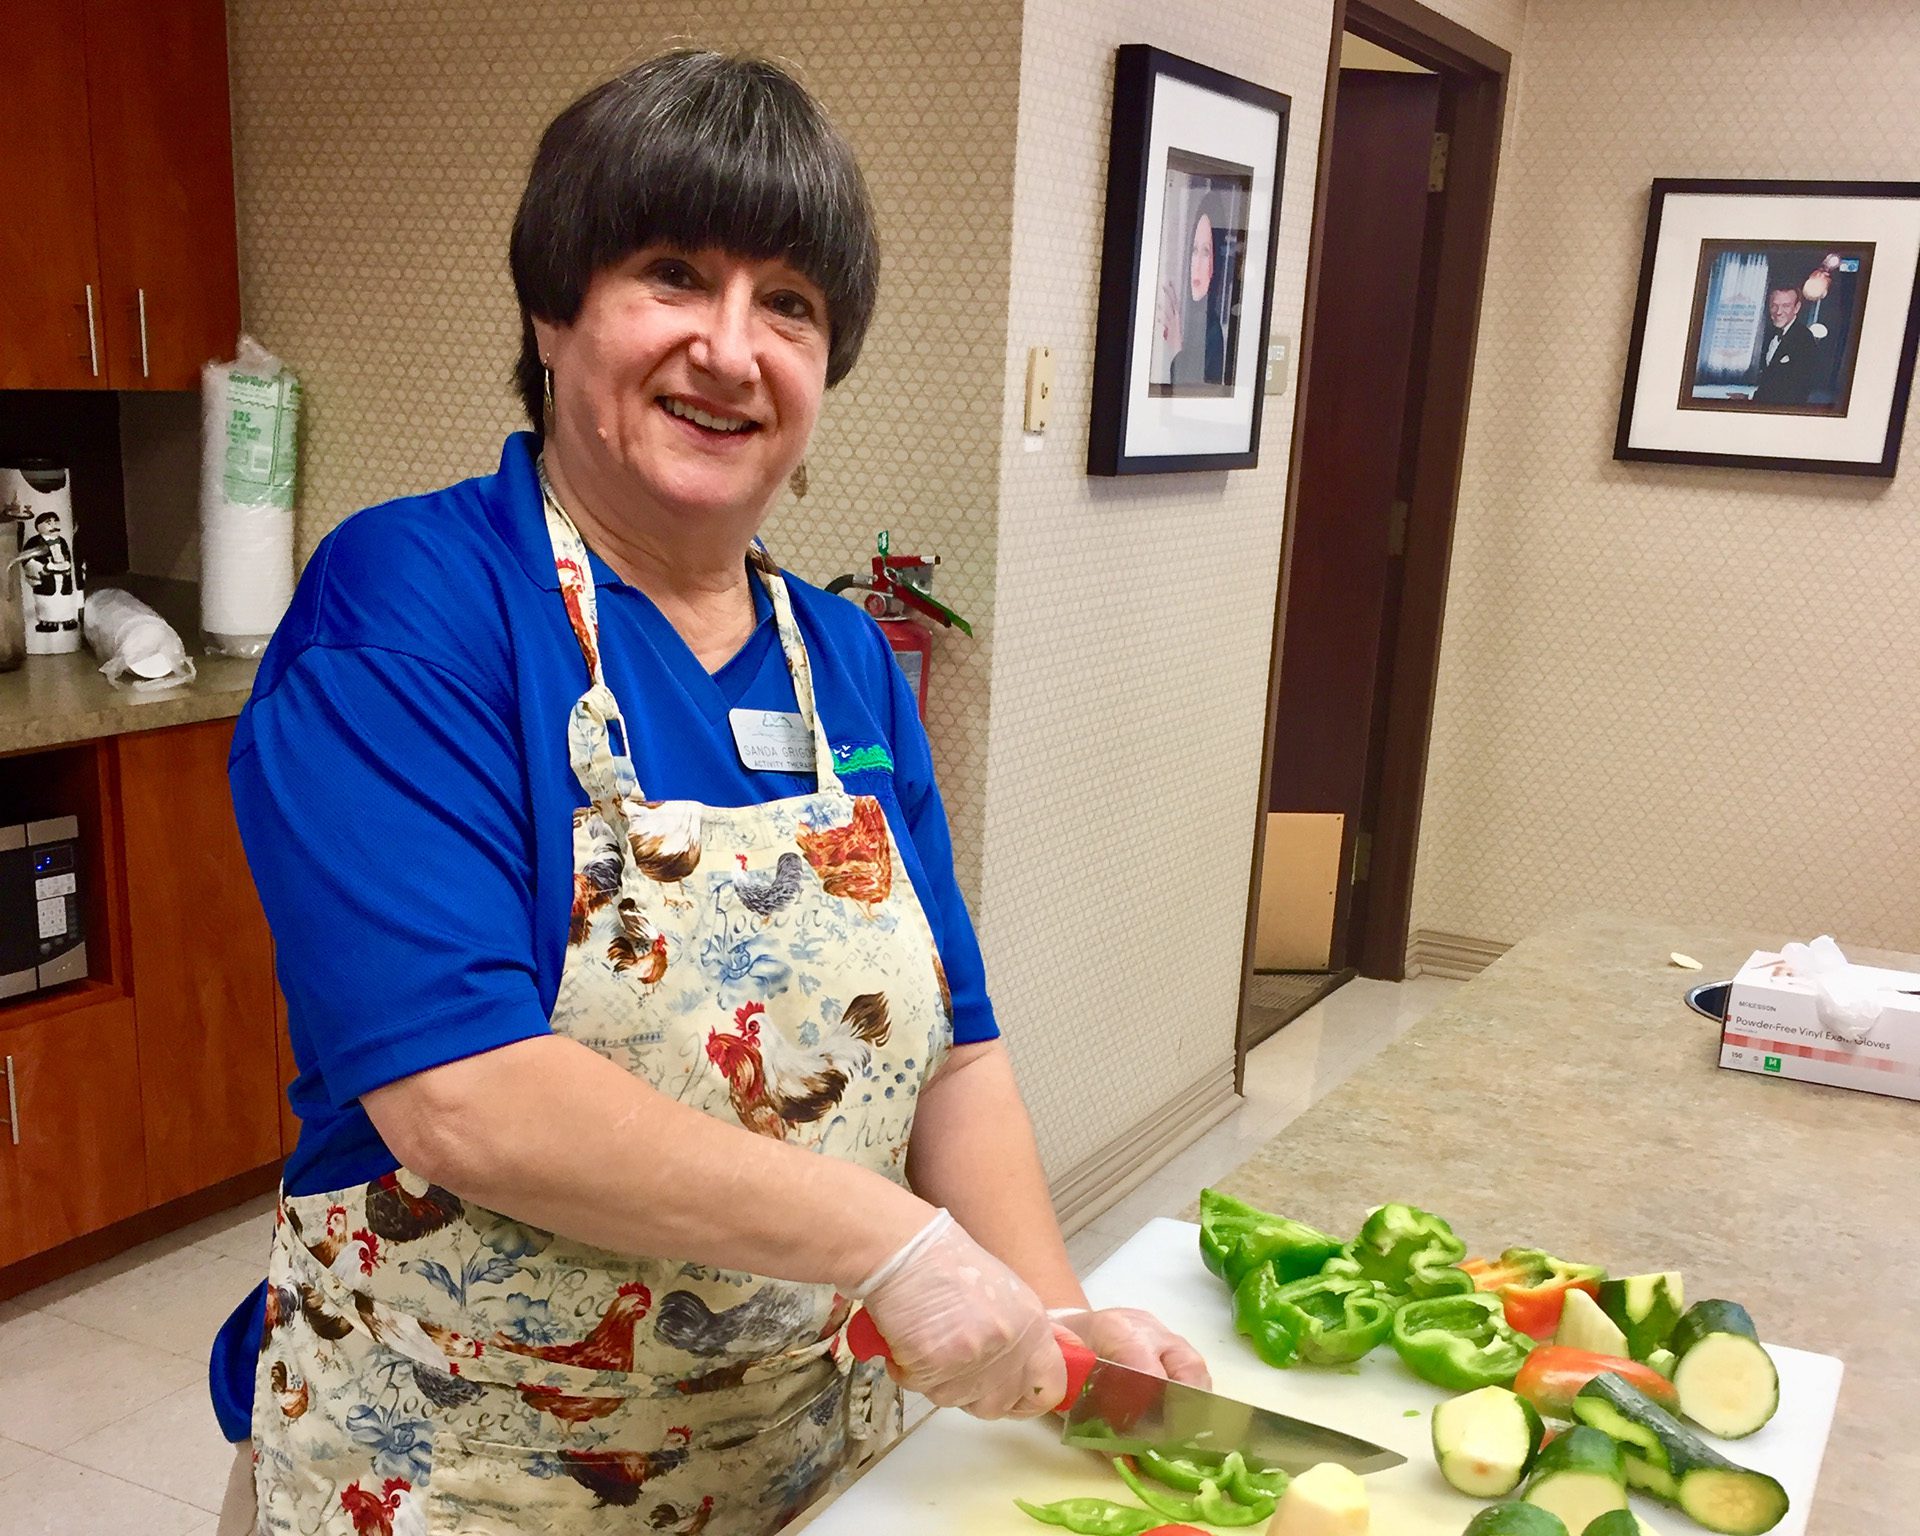 Residents enjoy being in the kitchen with Sanda